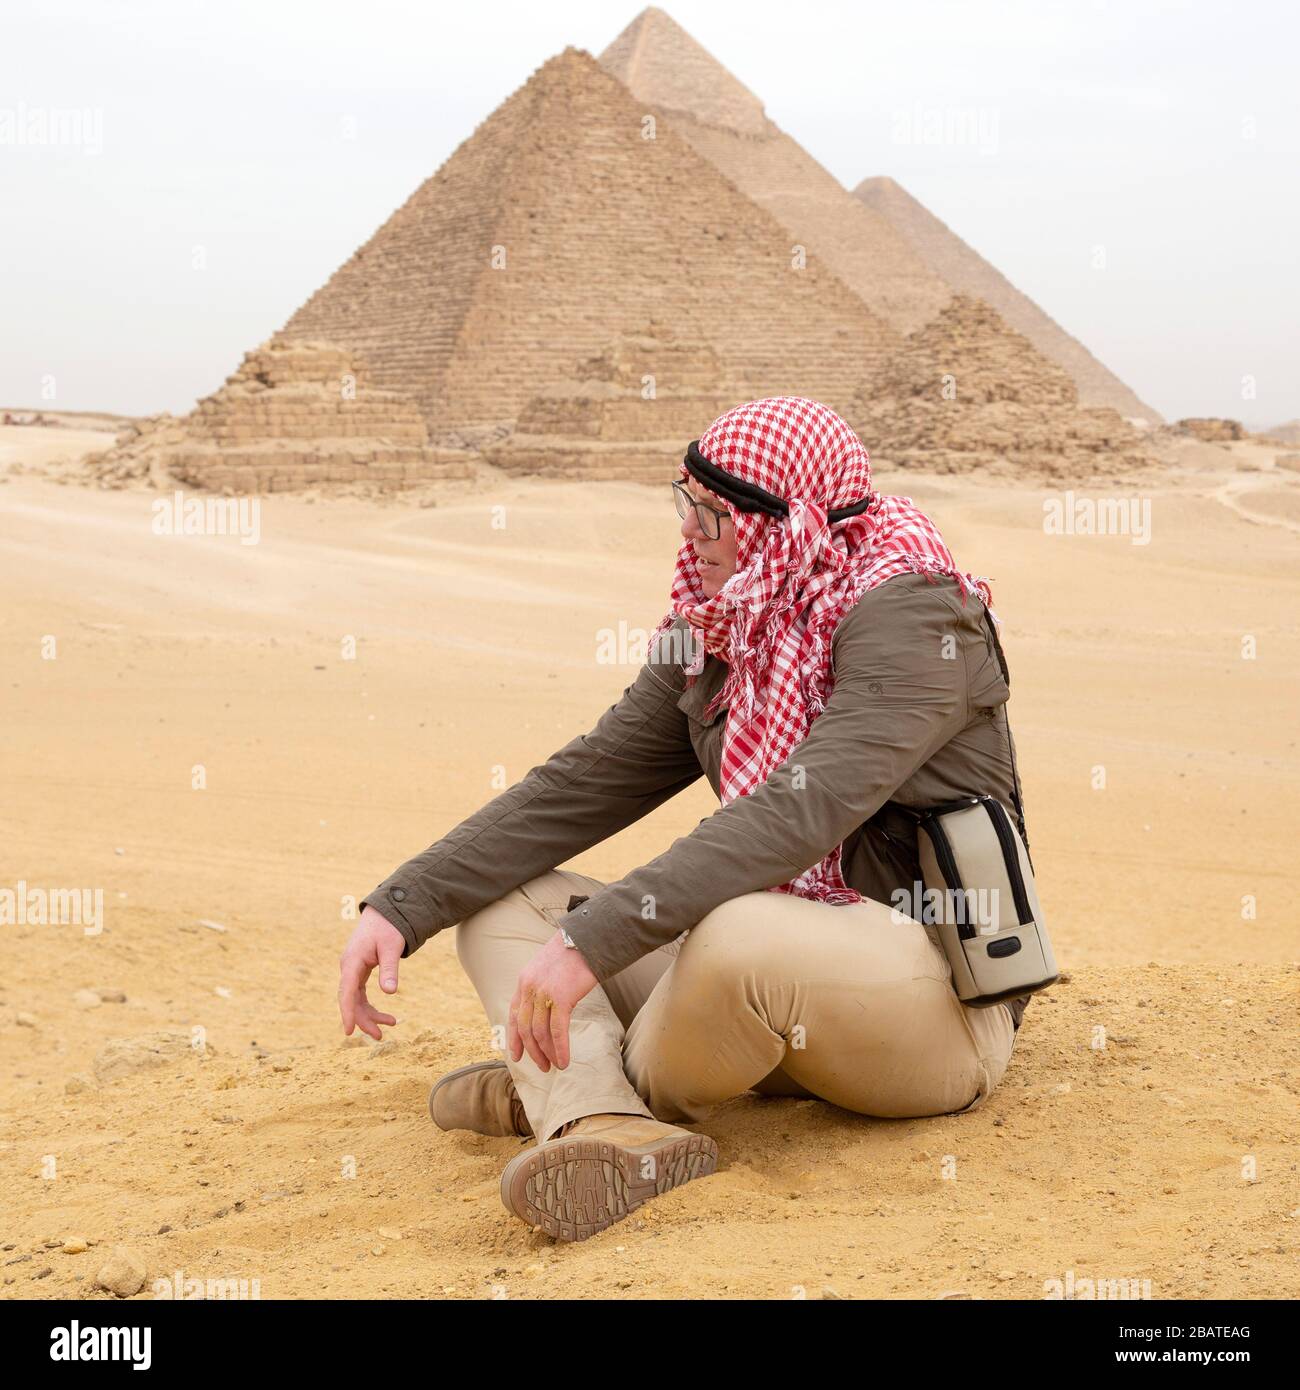 A tourist sitting in the desert wearing a traditional Middle-Eastern headdress while visiting the Giza Plateau at Cairo, Egypt. Stock Photo